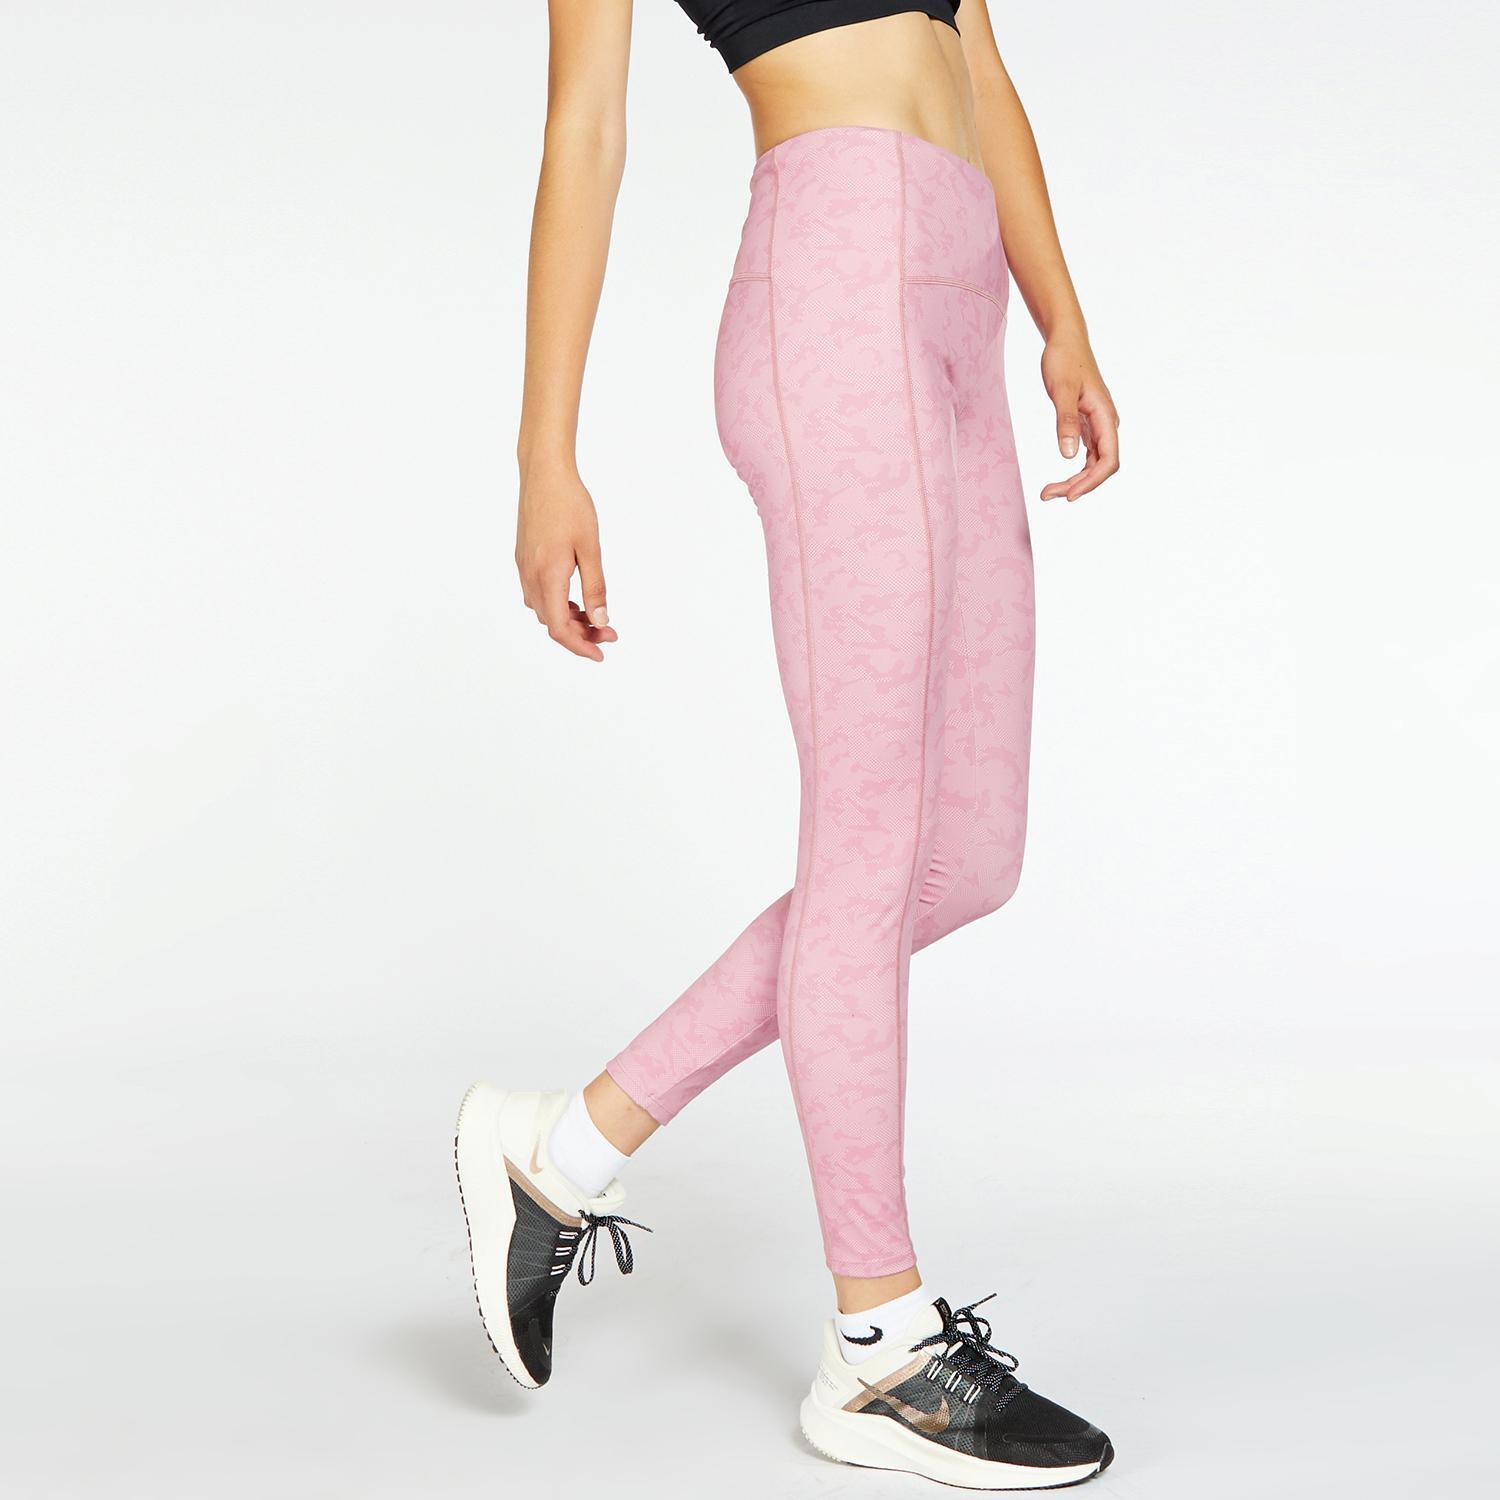 Ipso Experience 1-Rose-Legging Running Femme sports taille S